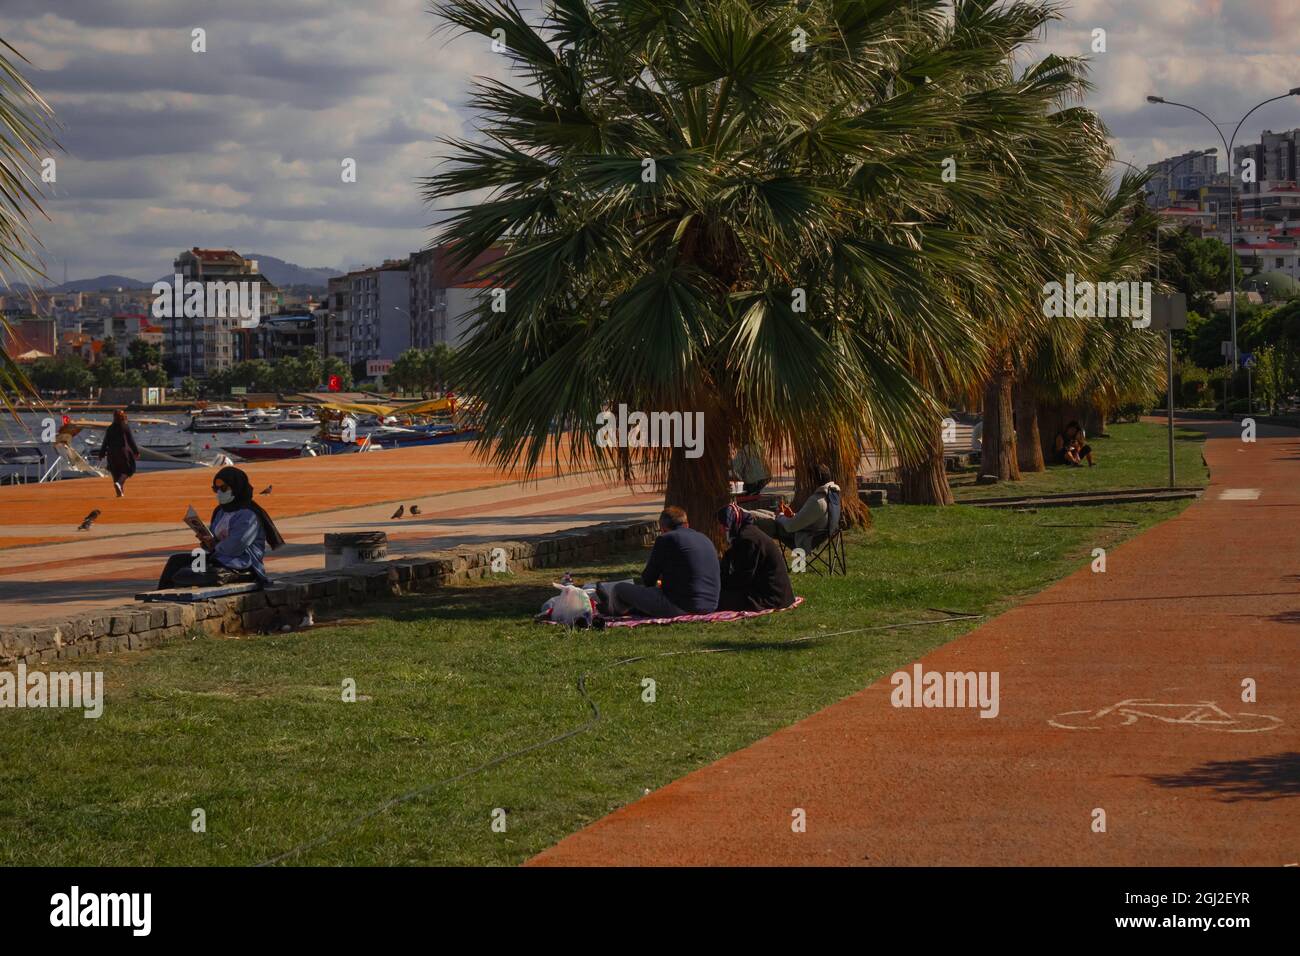 People having a picnic under palm trees. Covered woman reading a book. Walking path of the city. Stock Photo